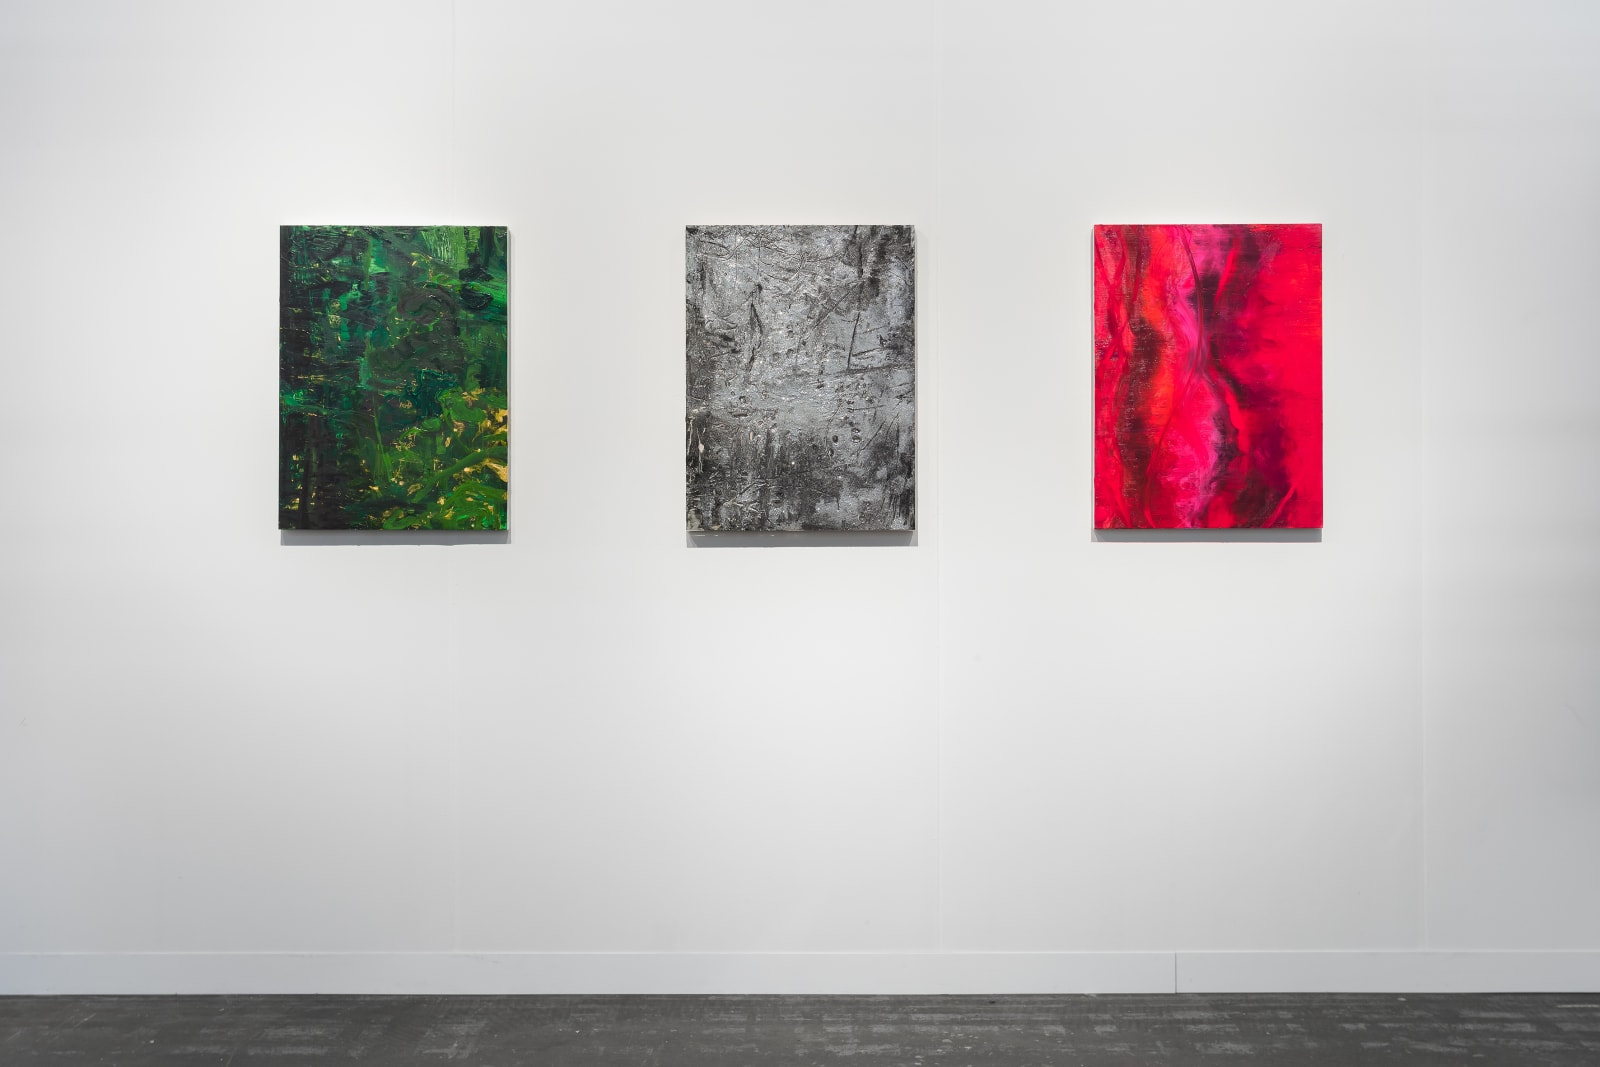 <p>Installation view: Presentation by Jim Hodges, Stephen Friedman Gallery at The Armory Show, New York, NY (2020).</p>